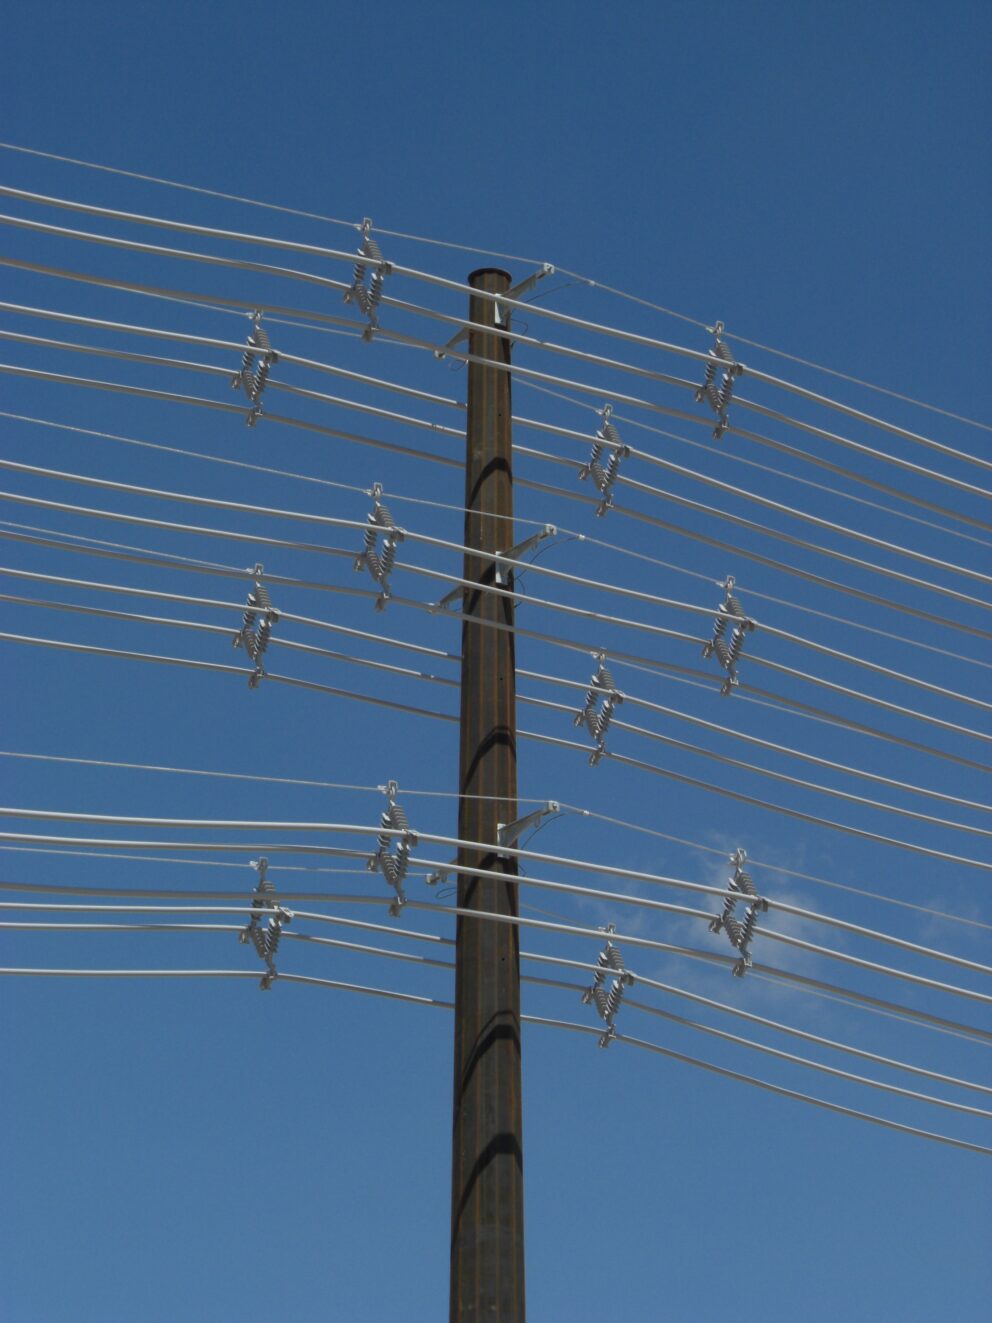 Multiple spacer cable systems installed on the same pole